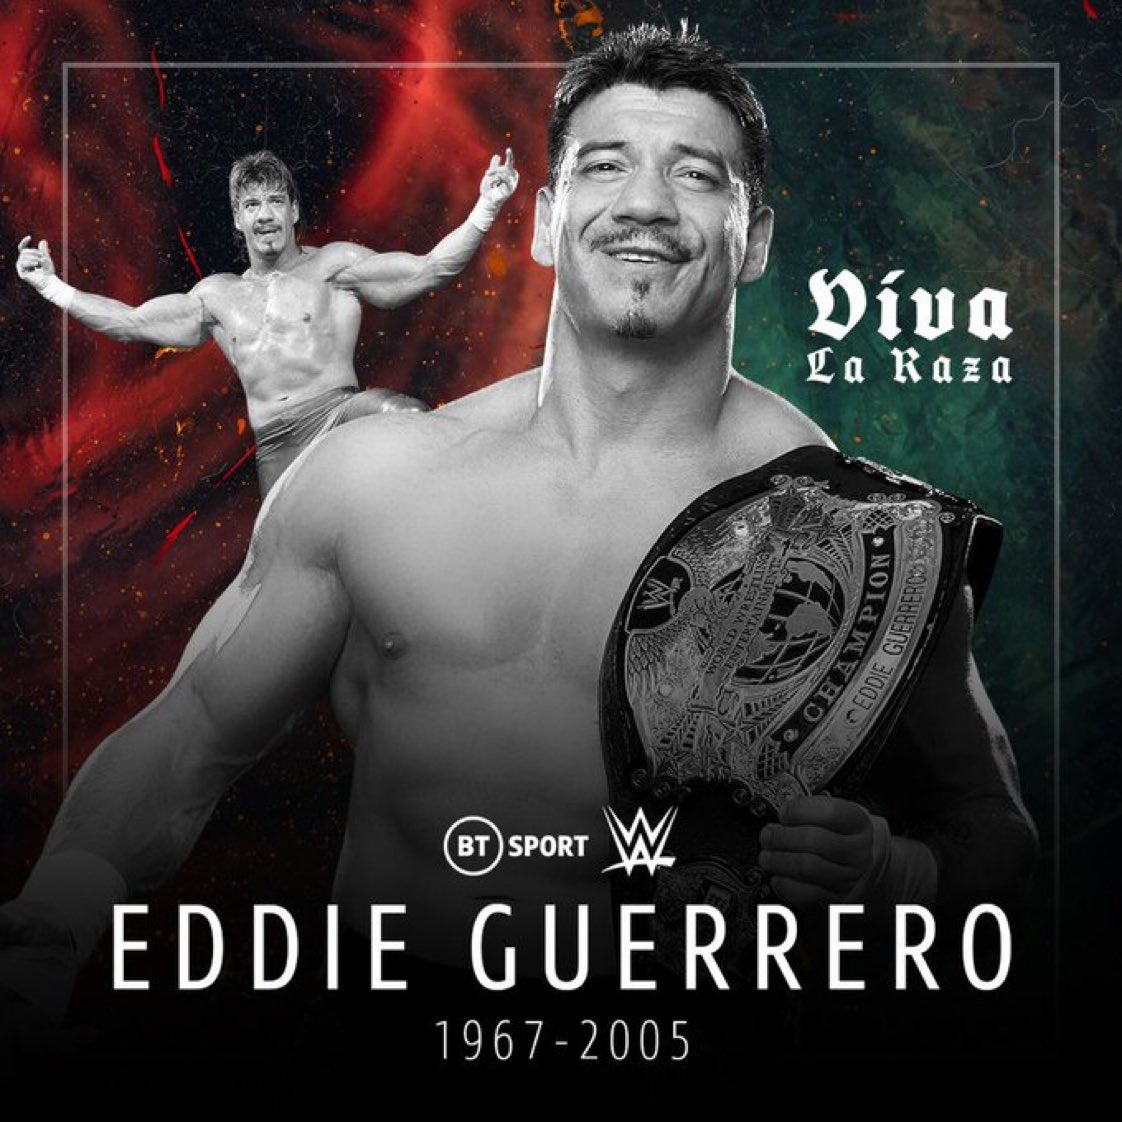 Happy birthday Eddie, WWE fans  worldwide miss you. 

The late, Eddie Guerrero would\ve turned 54 today 